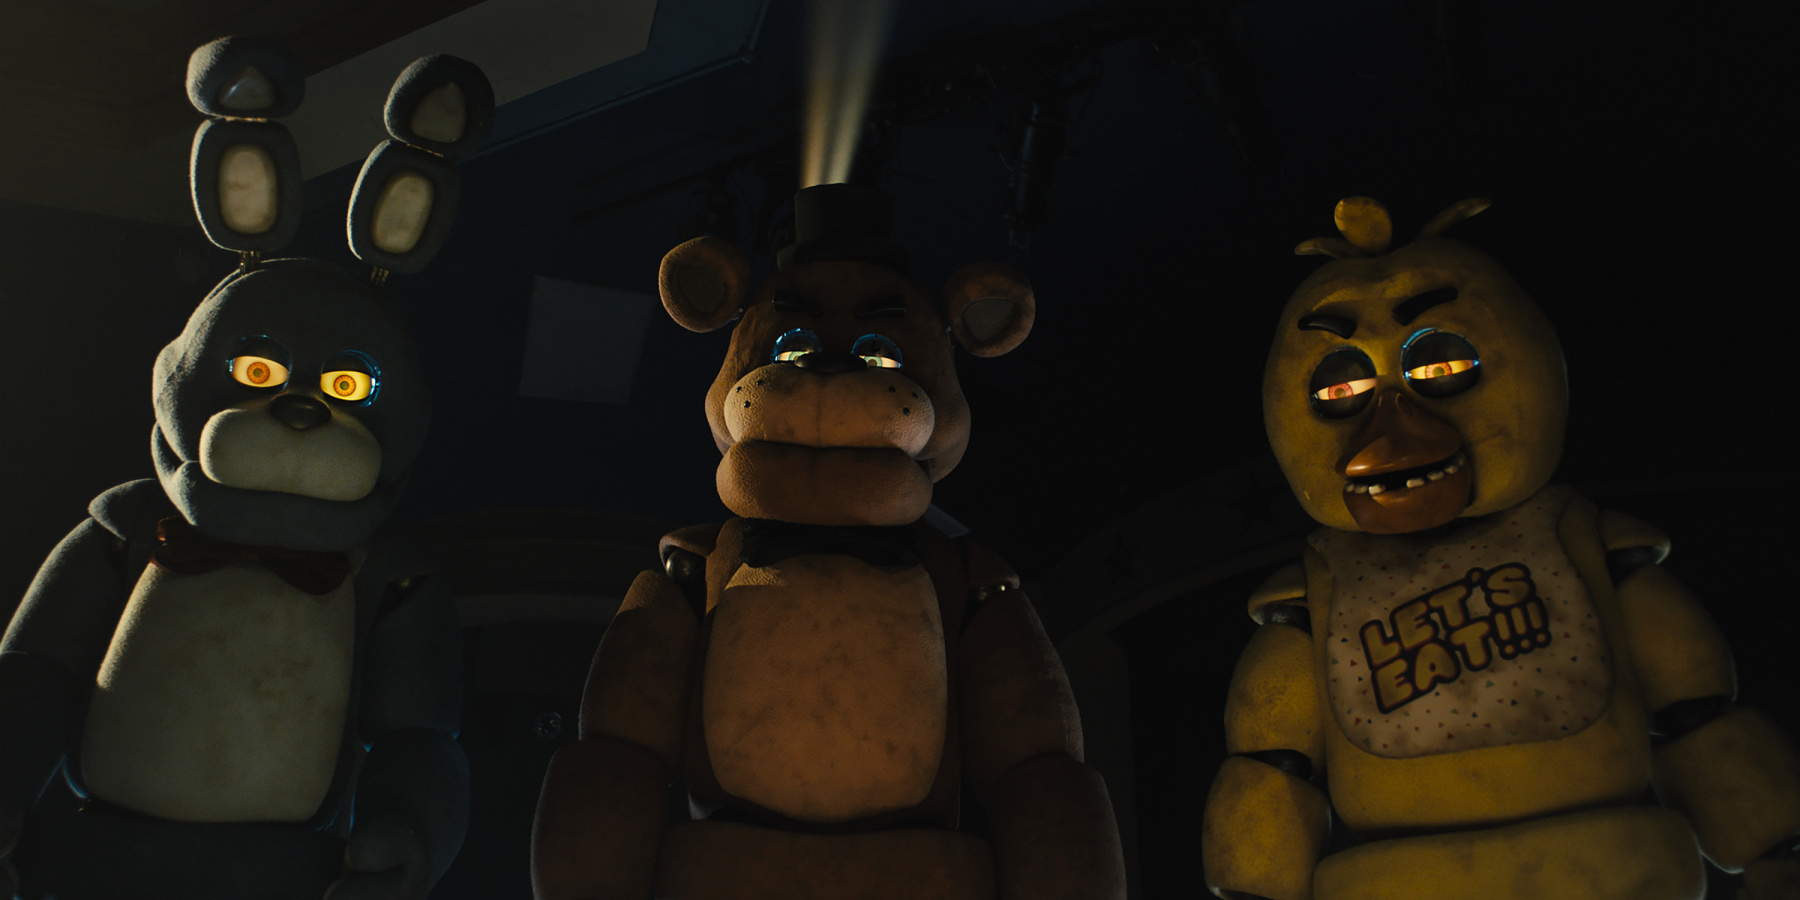 Five Nights At Freddy's, does a good game make a good movie